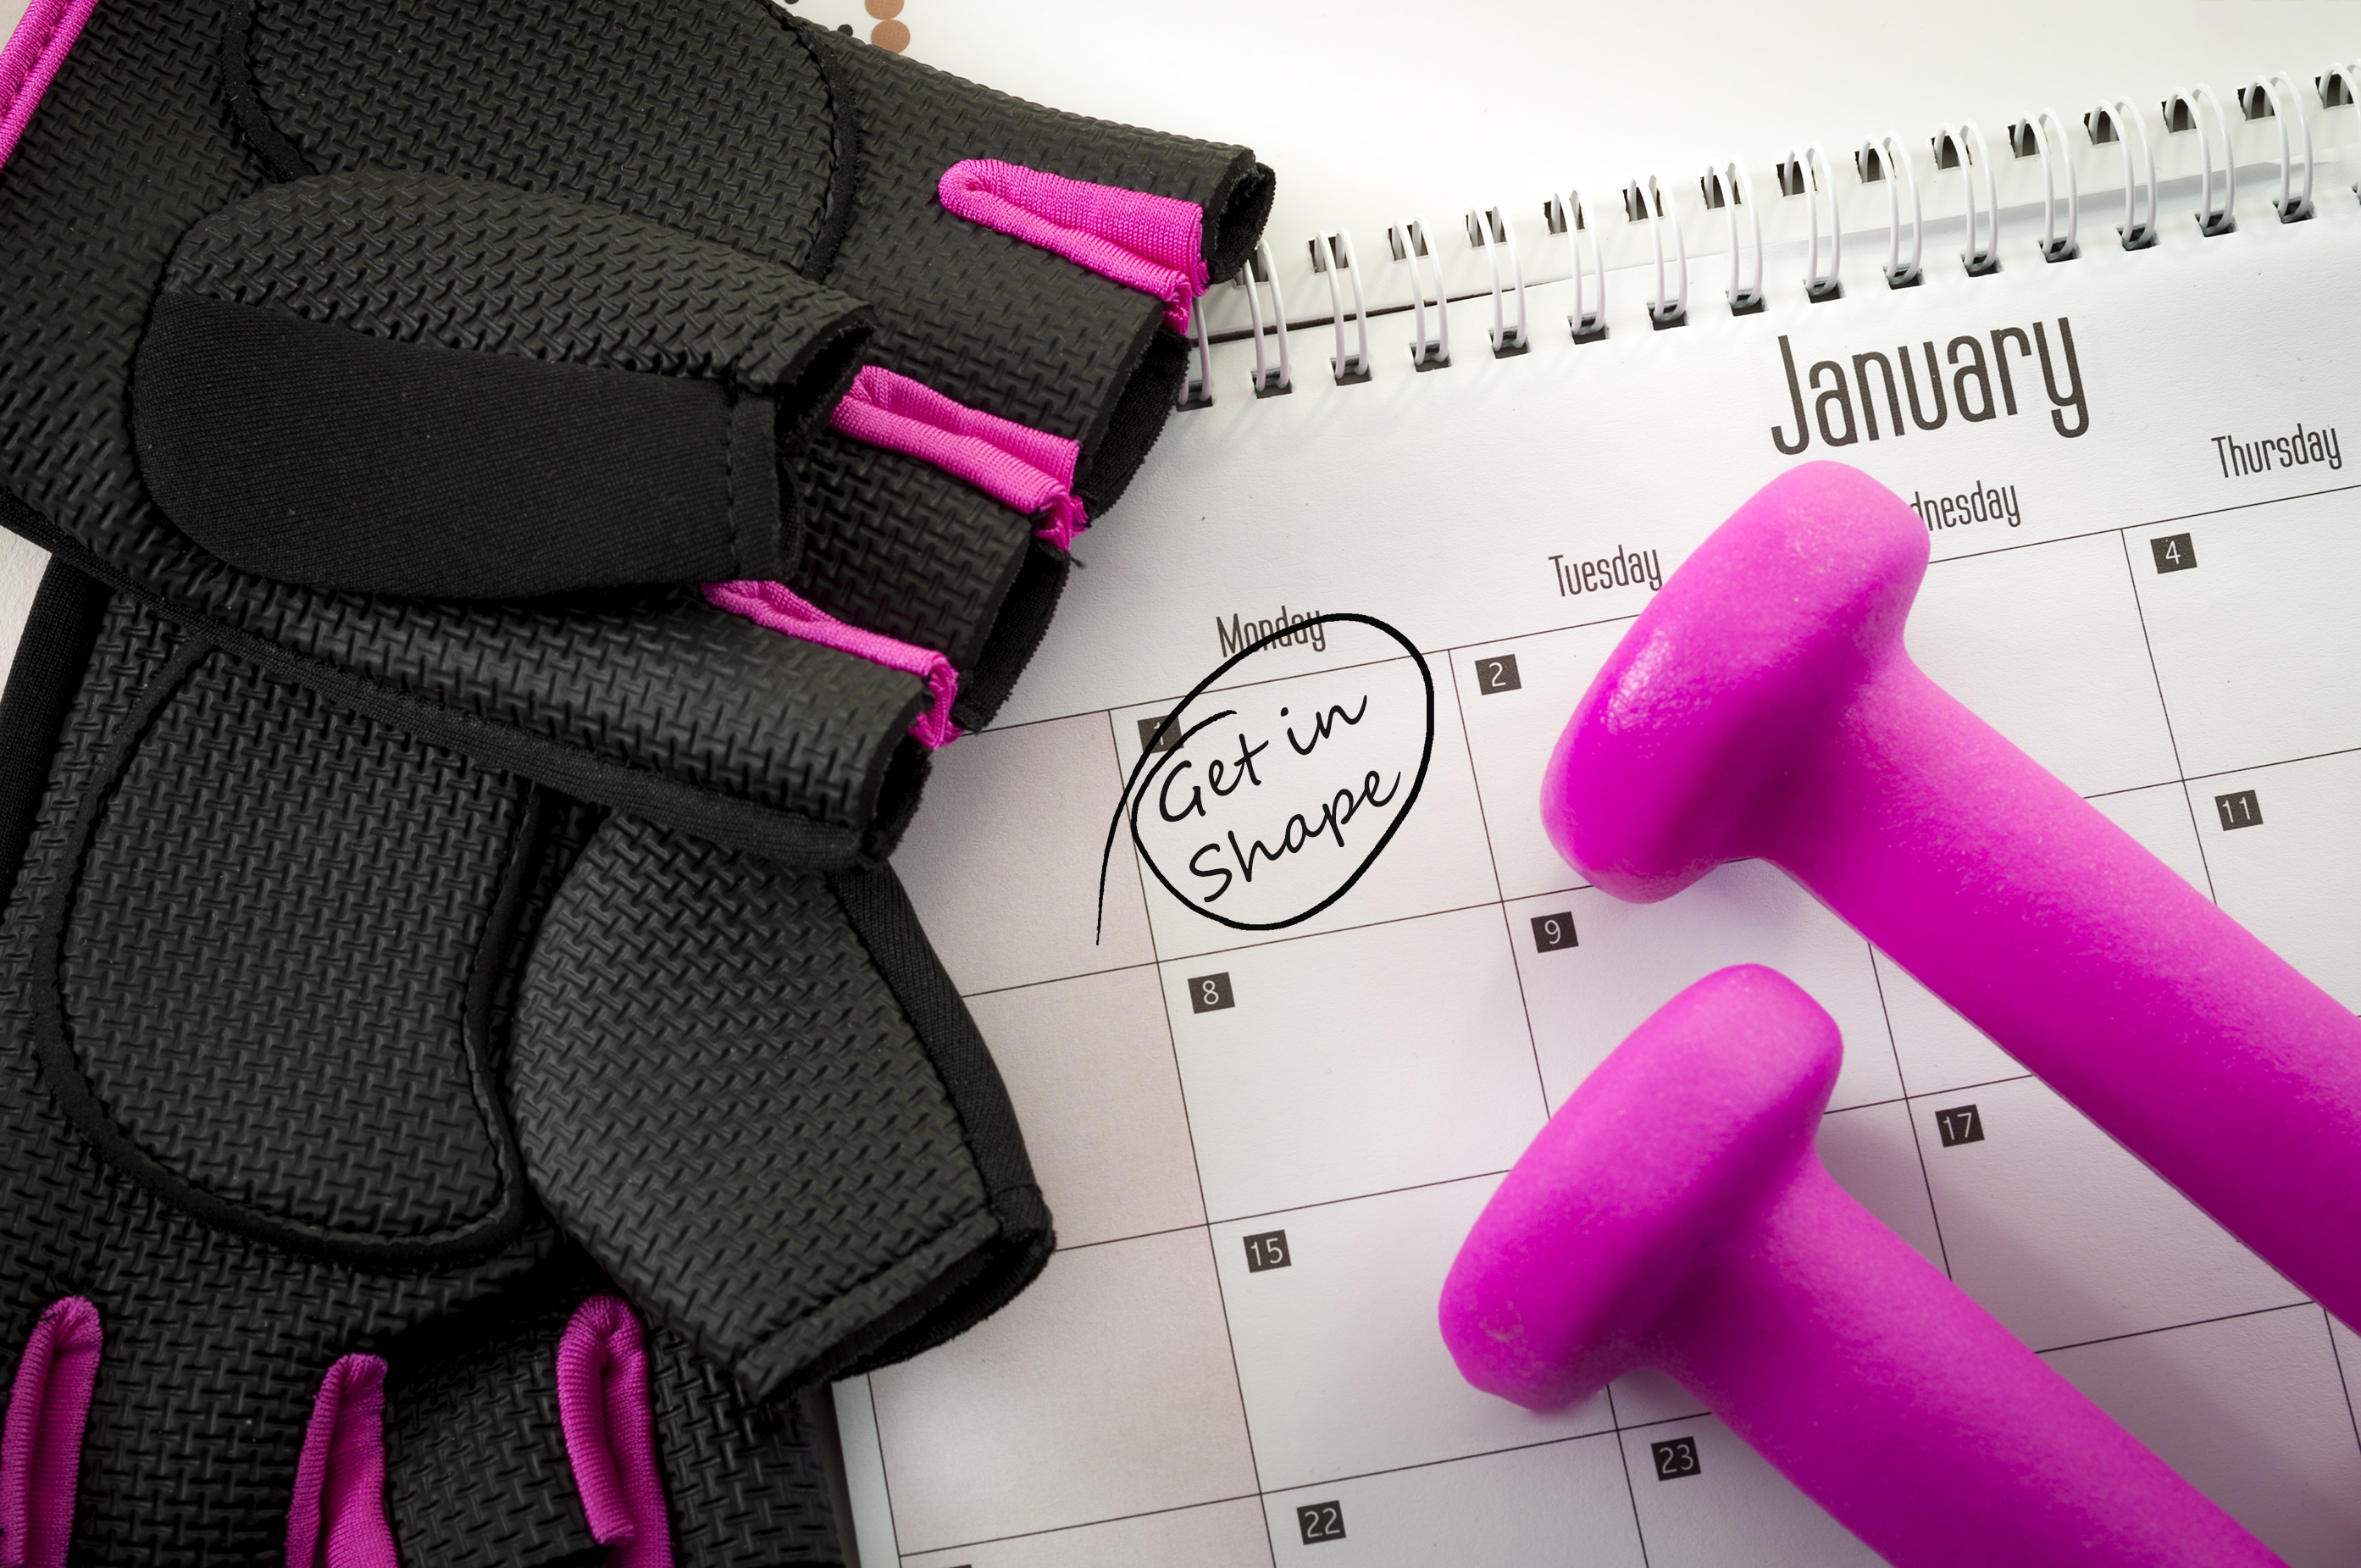 New year resolution and the desire to get in shape concept with a calendar with january first circled, gym equipment like purple dumbbells and pink and black workout gloves